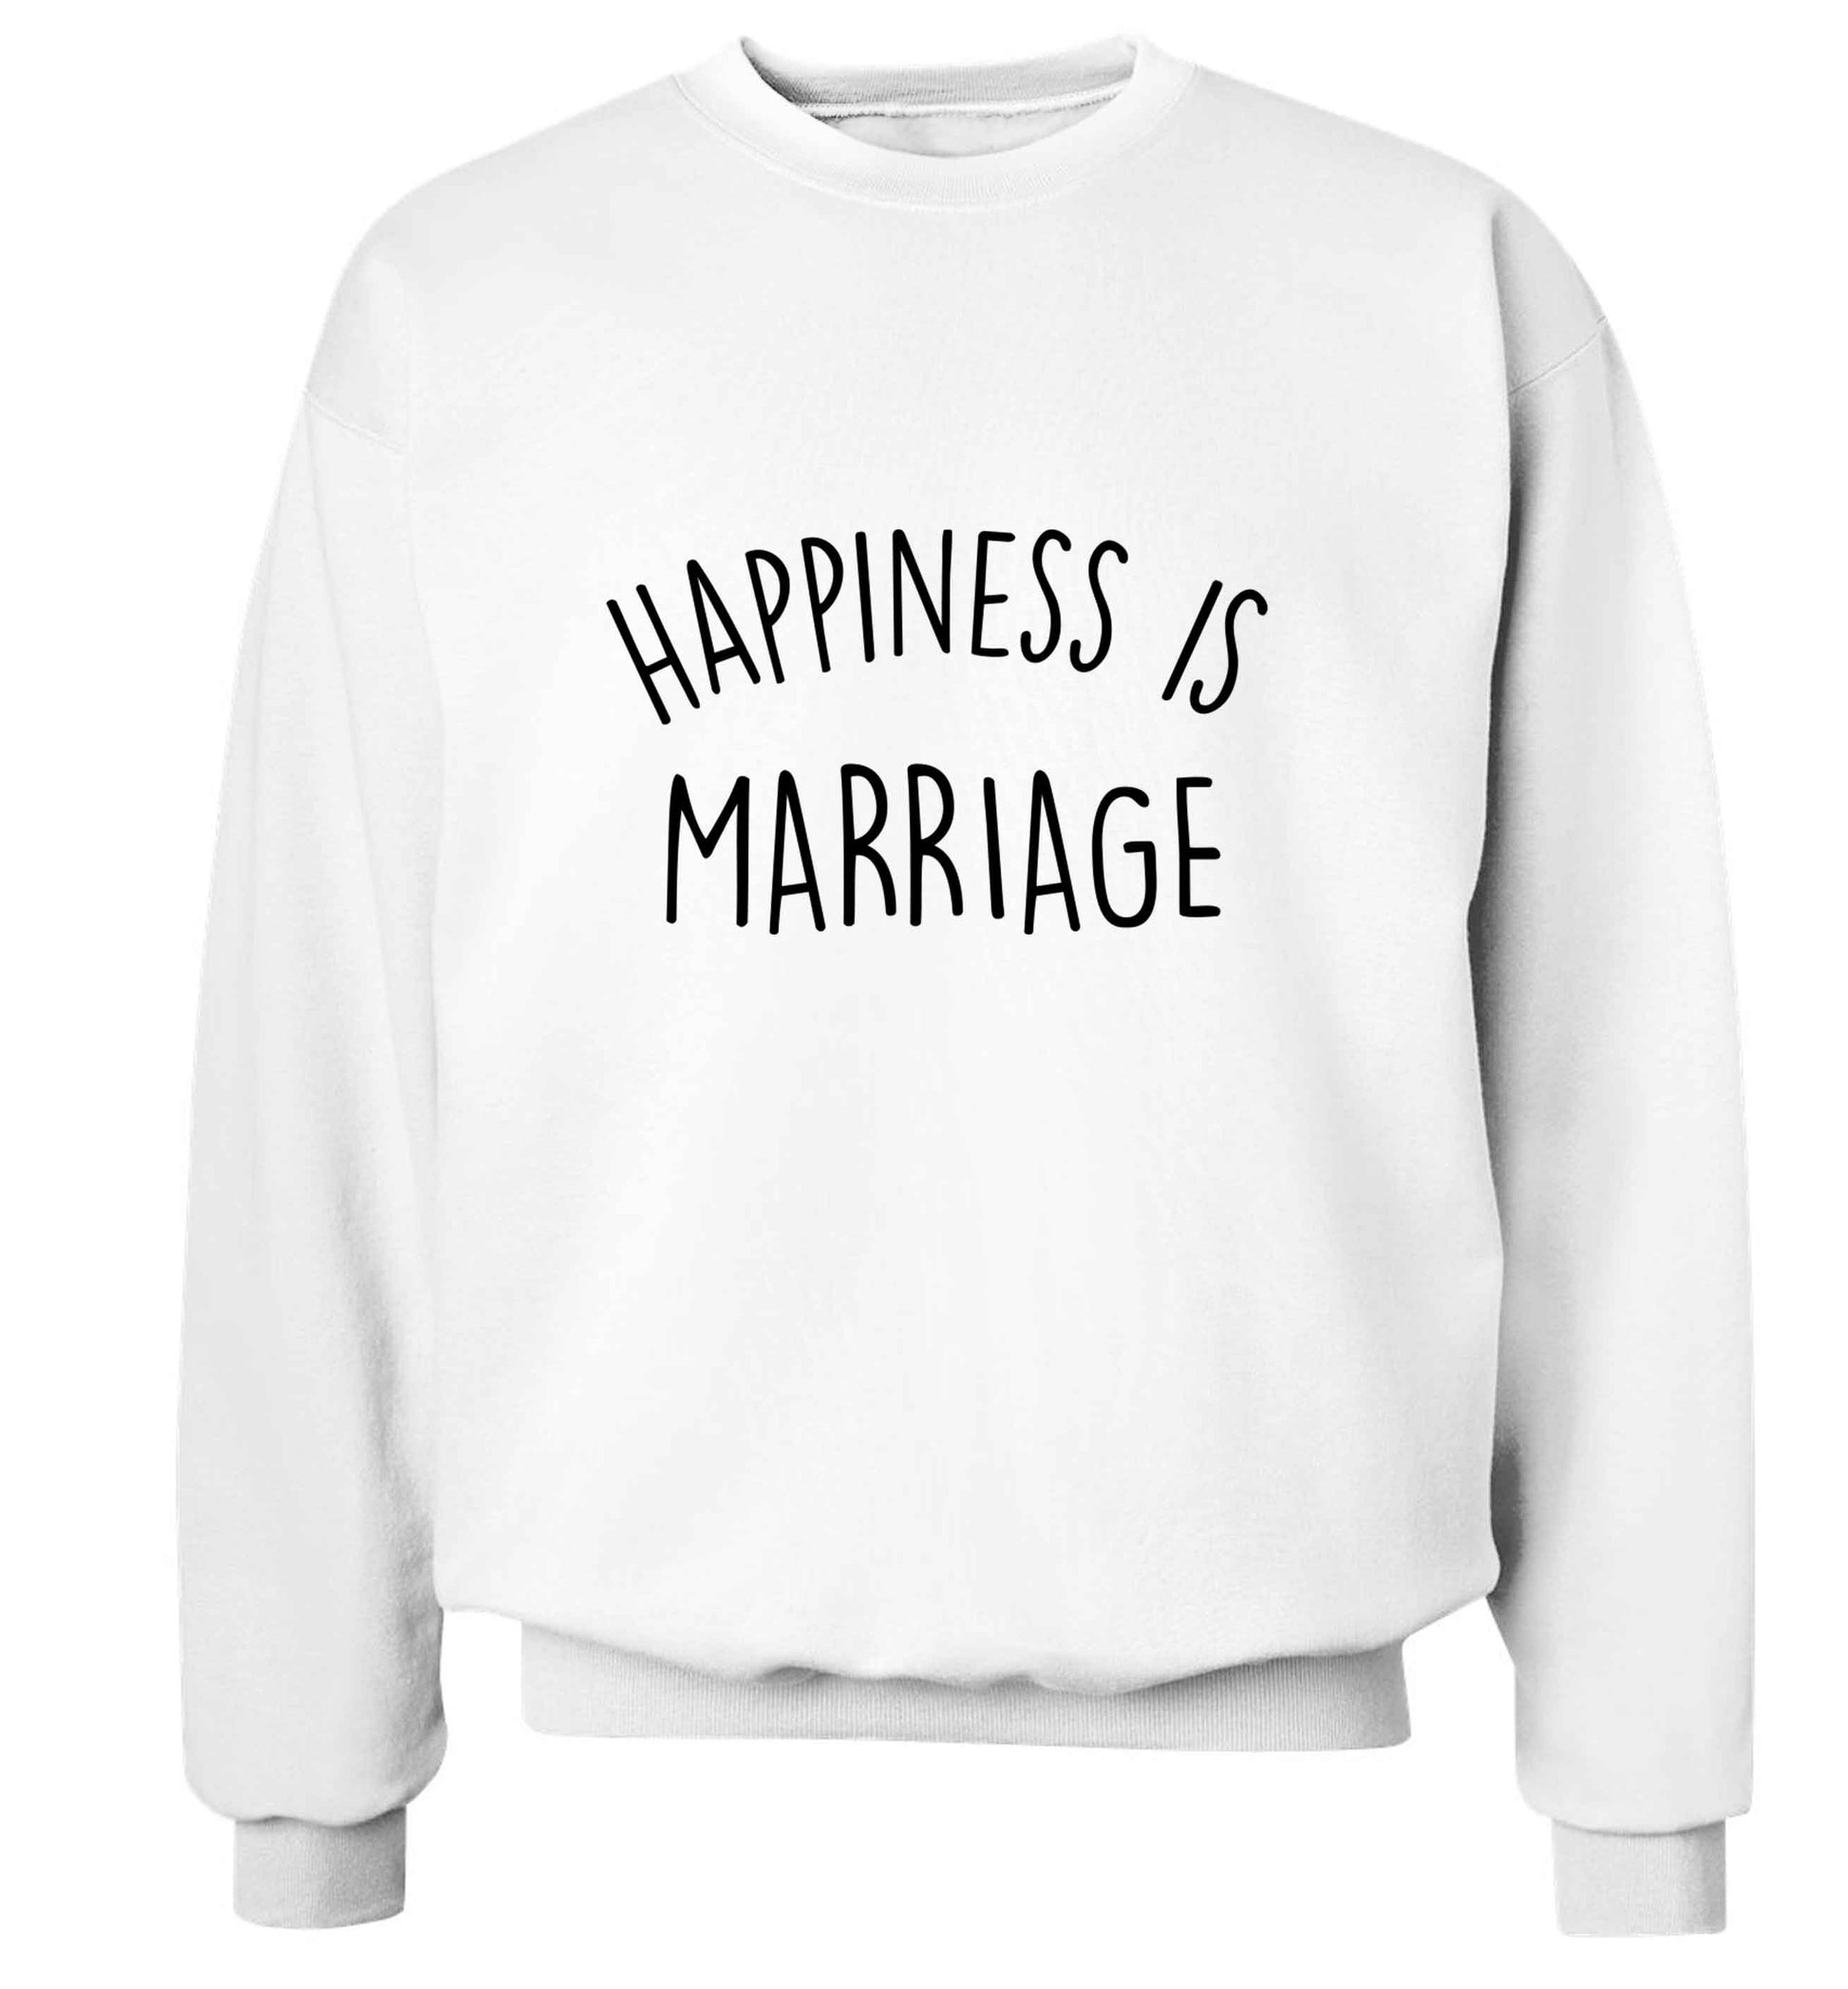 Happiness is marriage adult's unisex white sweater 2XL